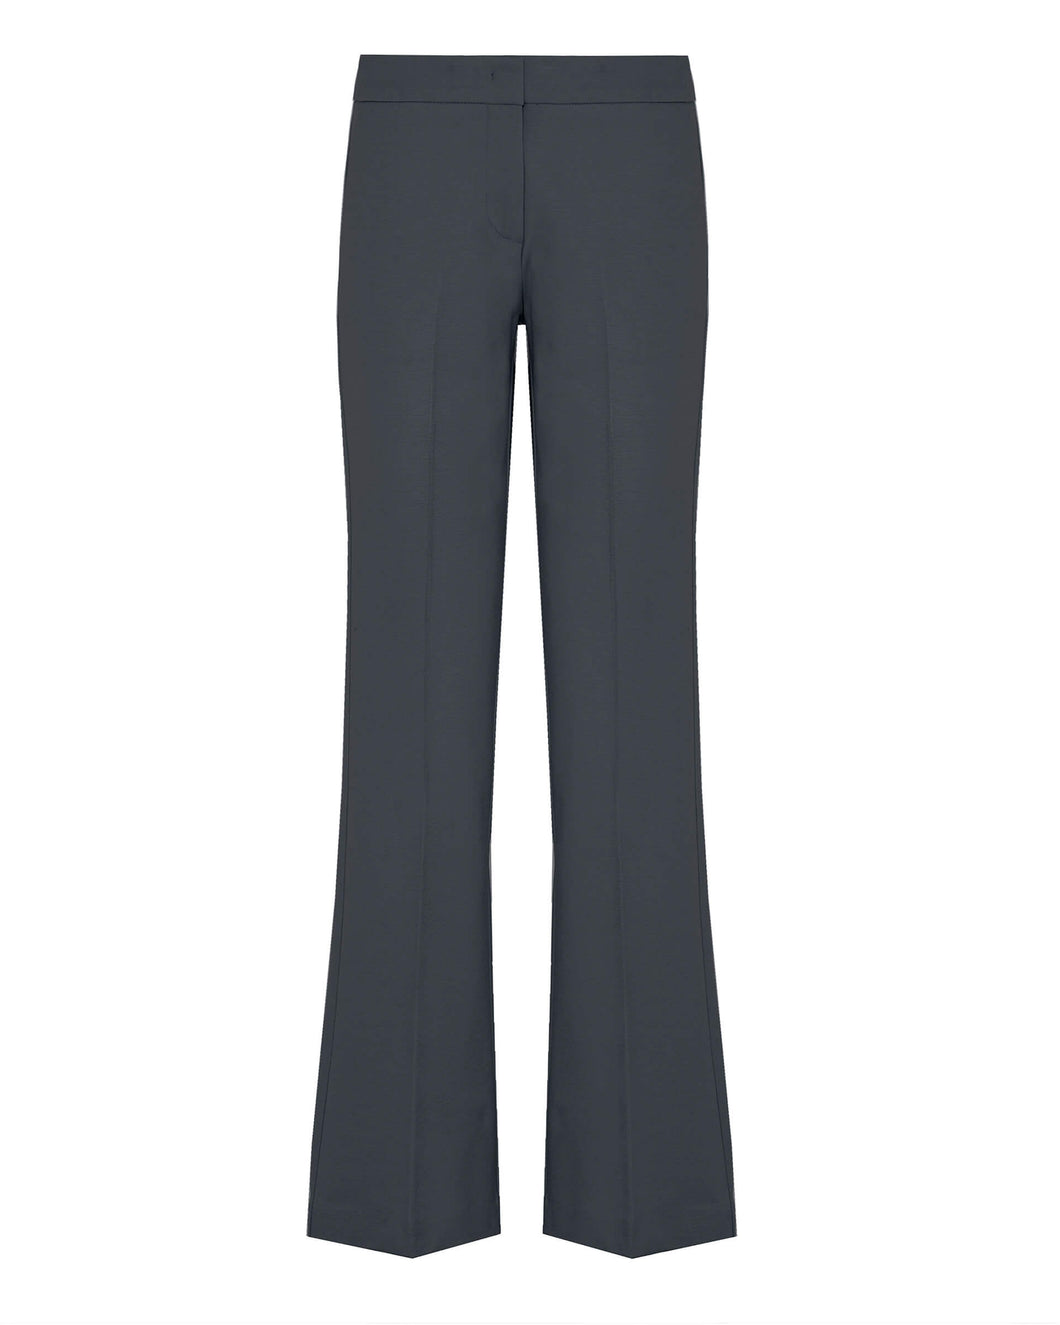 Beatrice B Anthracite Straight Leg Trousers